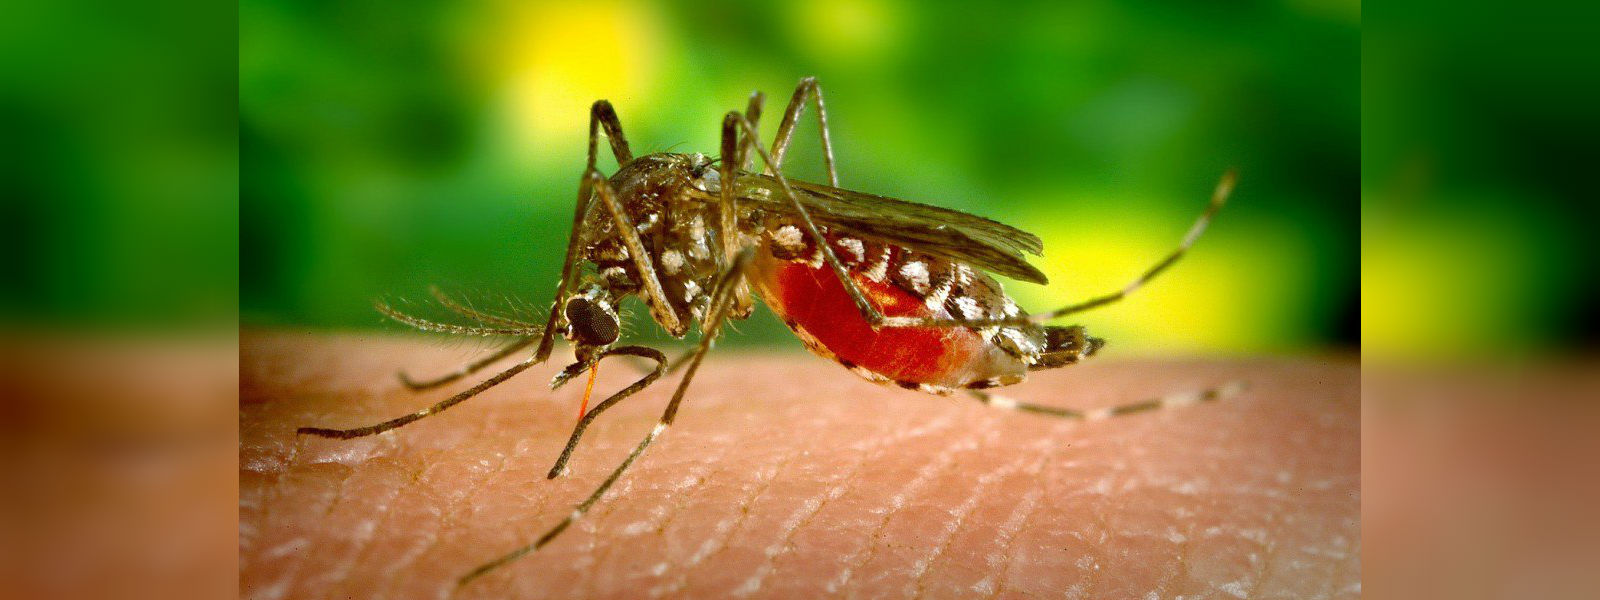 Malaria vector Anopheles stephensi on the rise